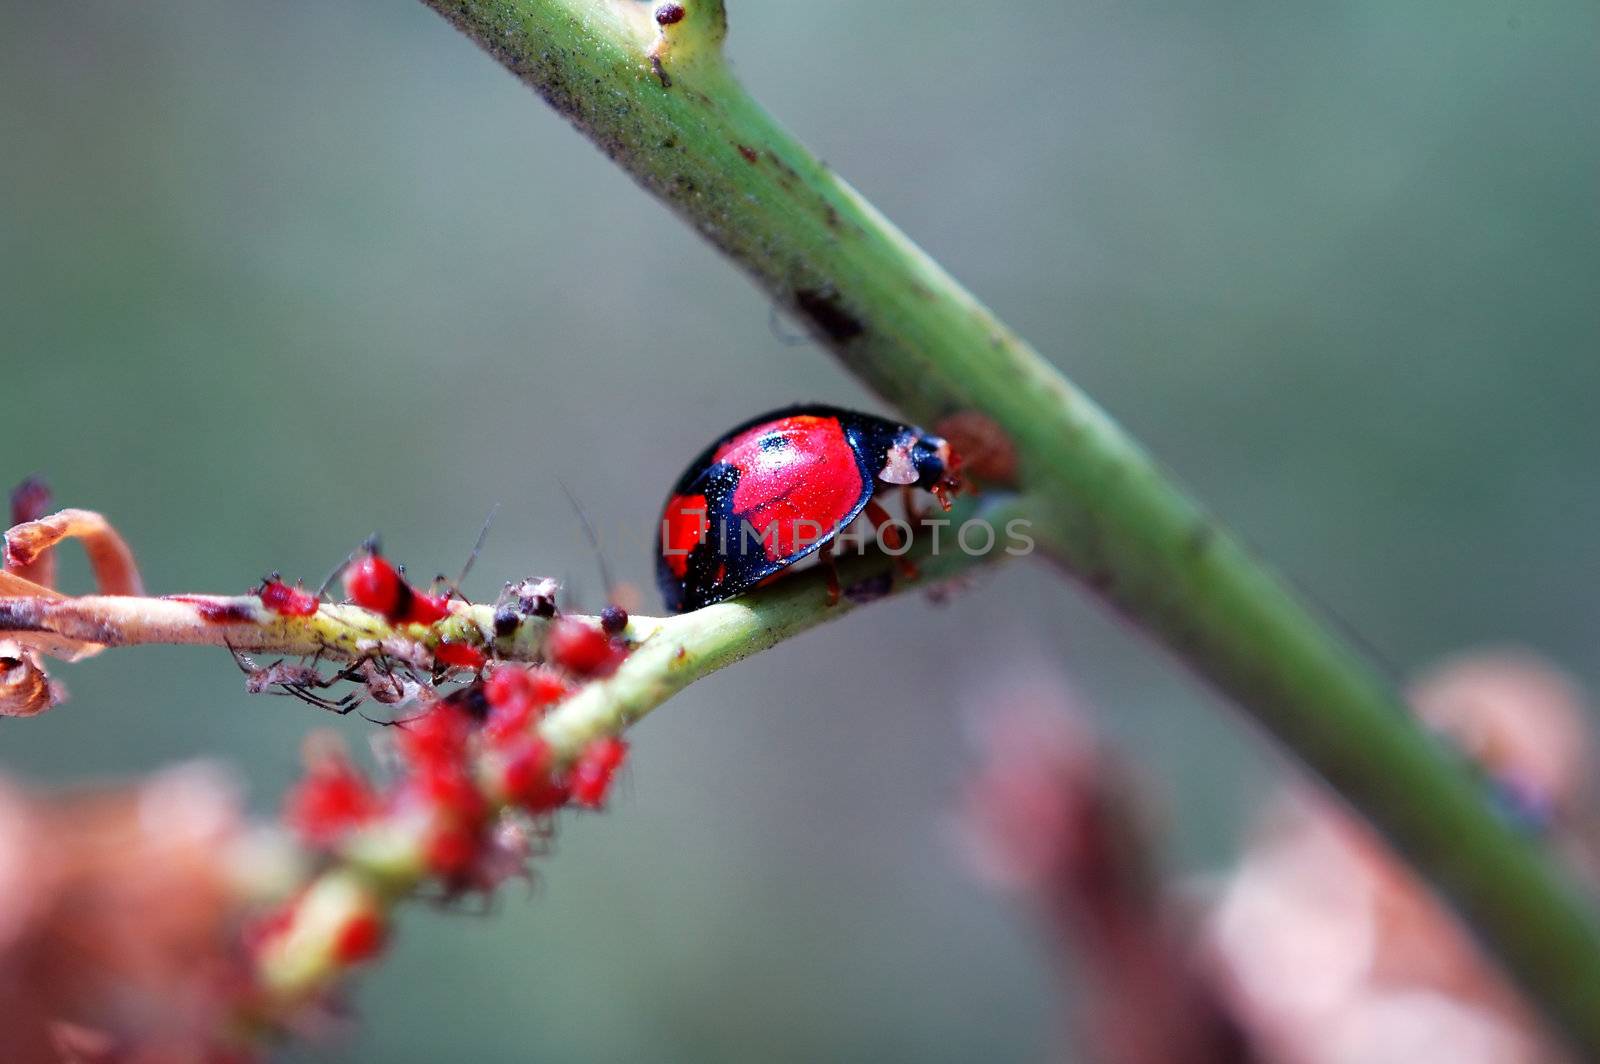 A ladybird staying with the group of red aphids